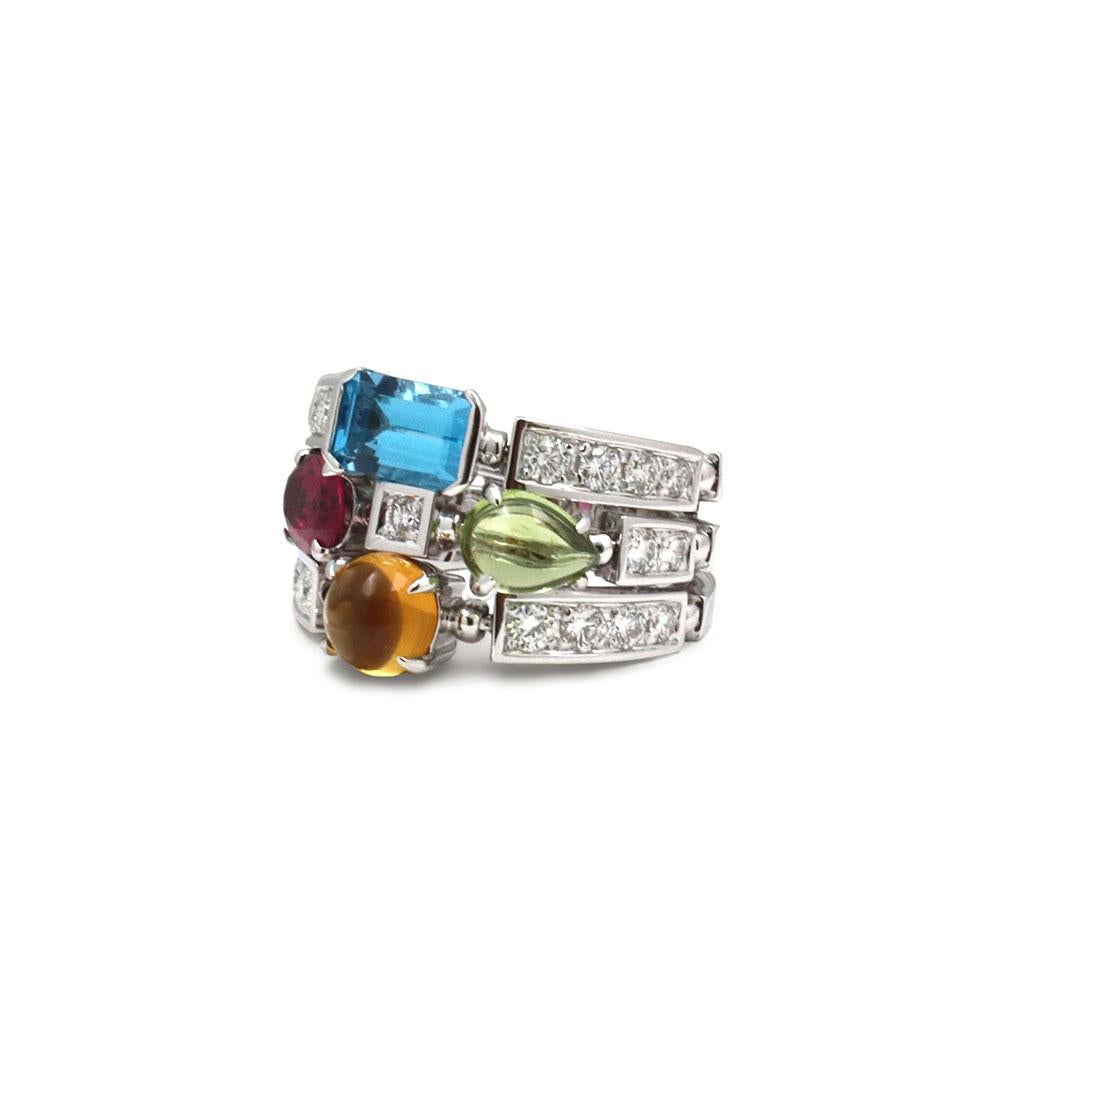 Authentic Bvlgari Allegra ring crafted in 18 karat white gold. The ring consists of three adjacent bands adorned with cabochon citrine, oval-faceted pink tourmaline, pear shape peridot cabochon and emerald cut blue topaz. The ring is set with 21